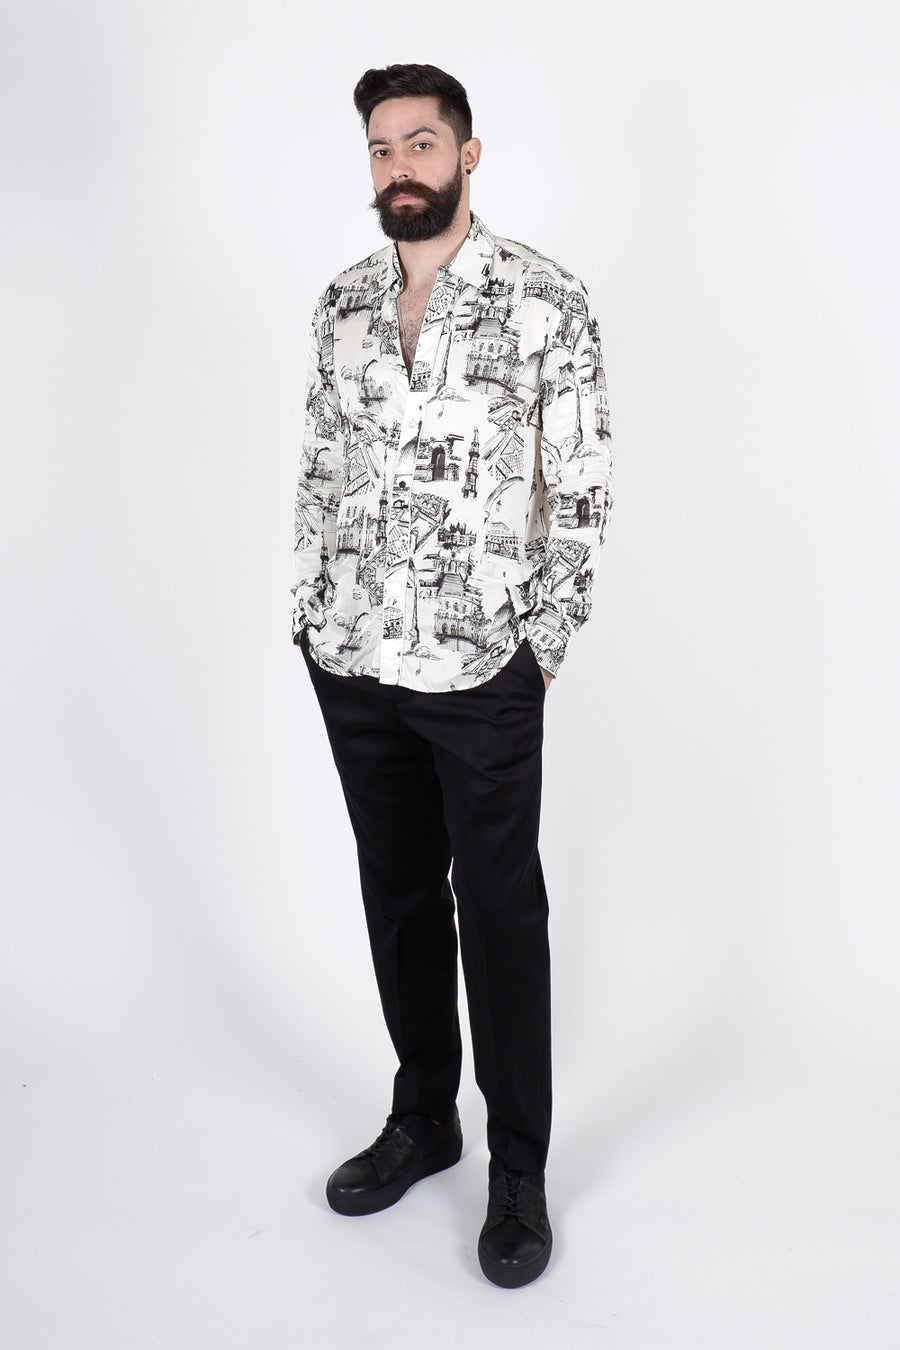 Buy the PT Torino Pure Silk Printed Shirt Black/White at Intro. Spend £50 for free UK delivery. Official stockists. We ship worldwide.